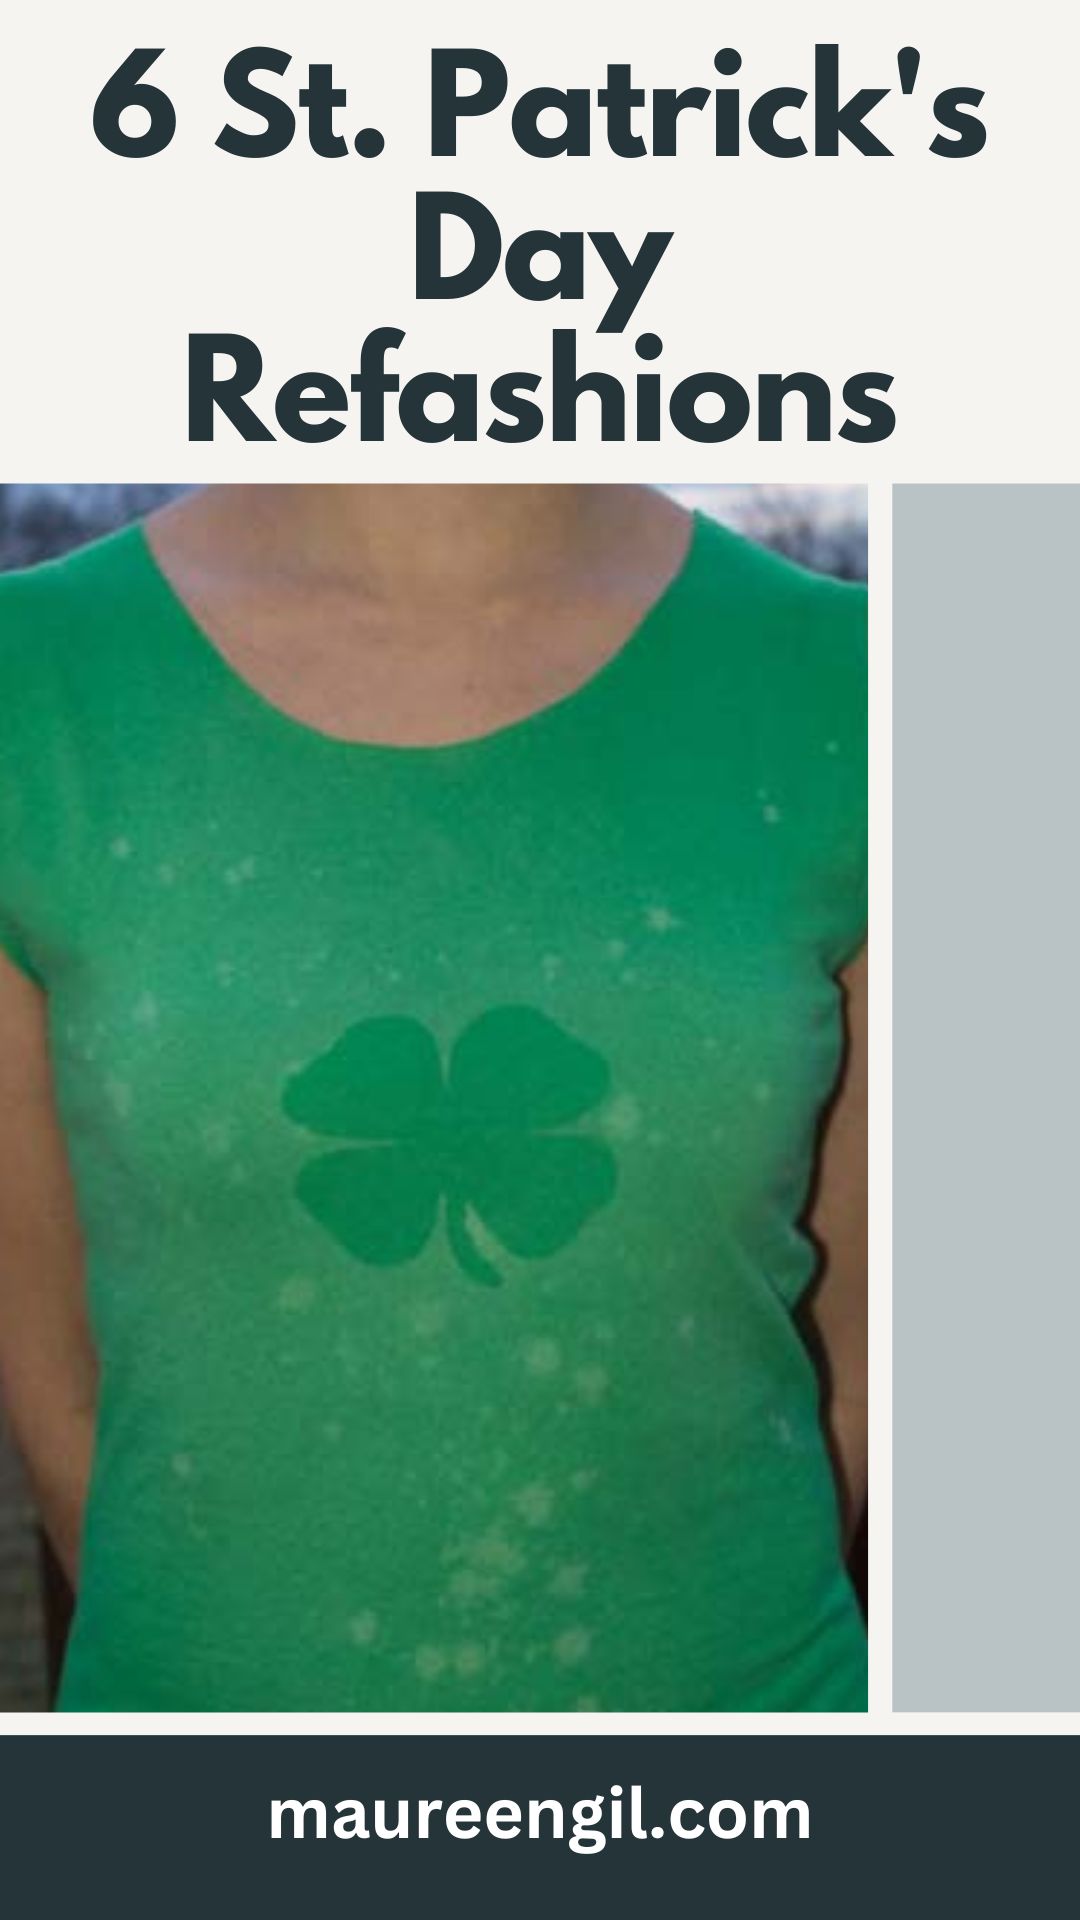 6 St. Patrick's Day clothing refashions and step-by-step sewing tutorials. #recycle #upcycle #refashionista #crafts #diy #clothes